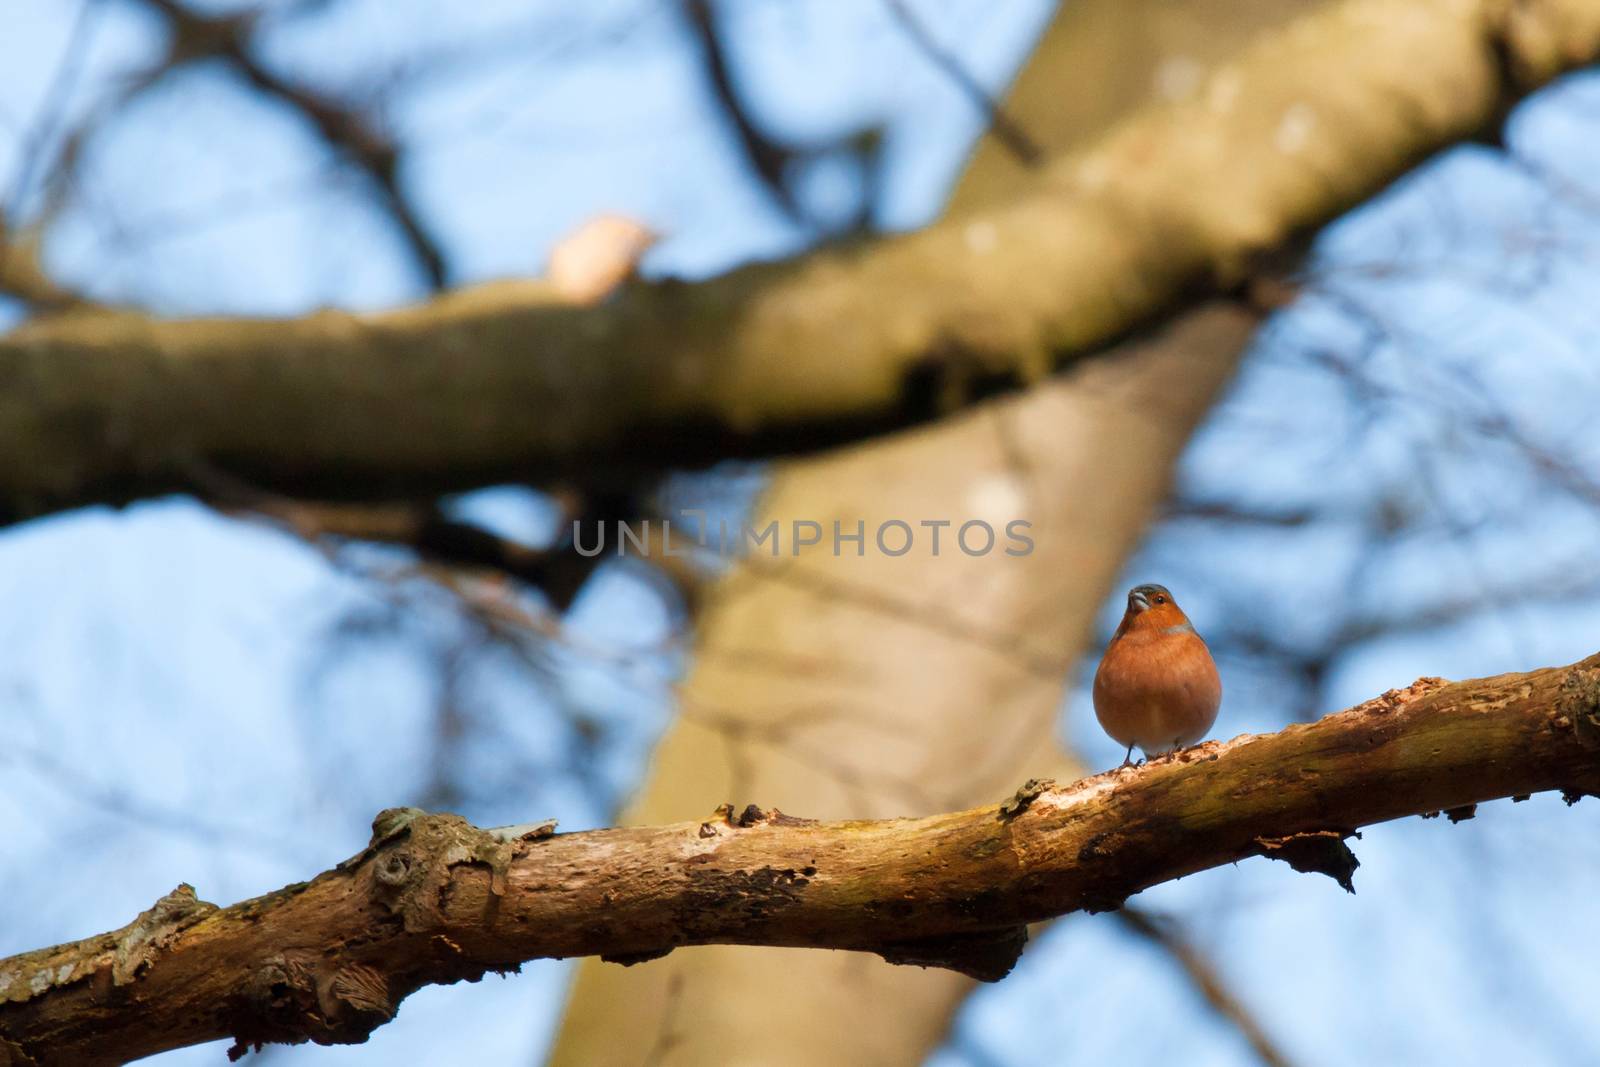 Chaffinch with big red chest on a twig by Sportactive